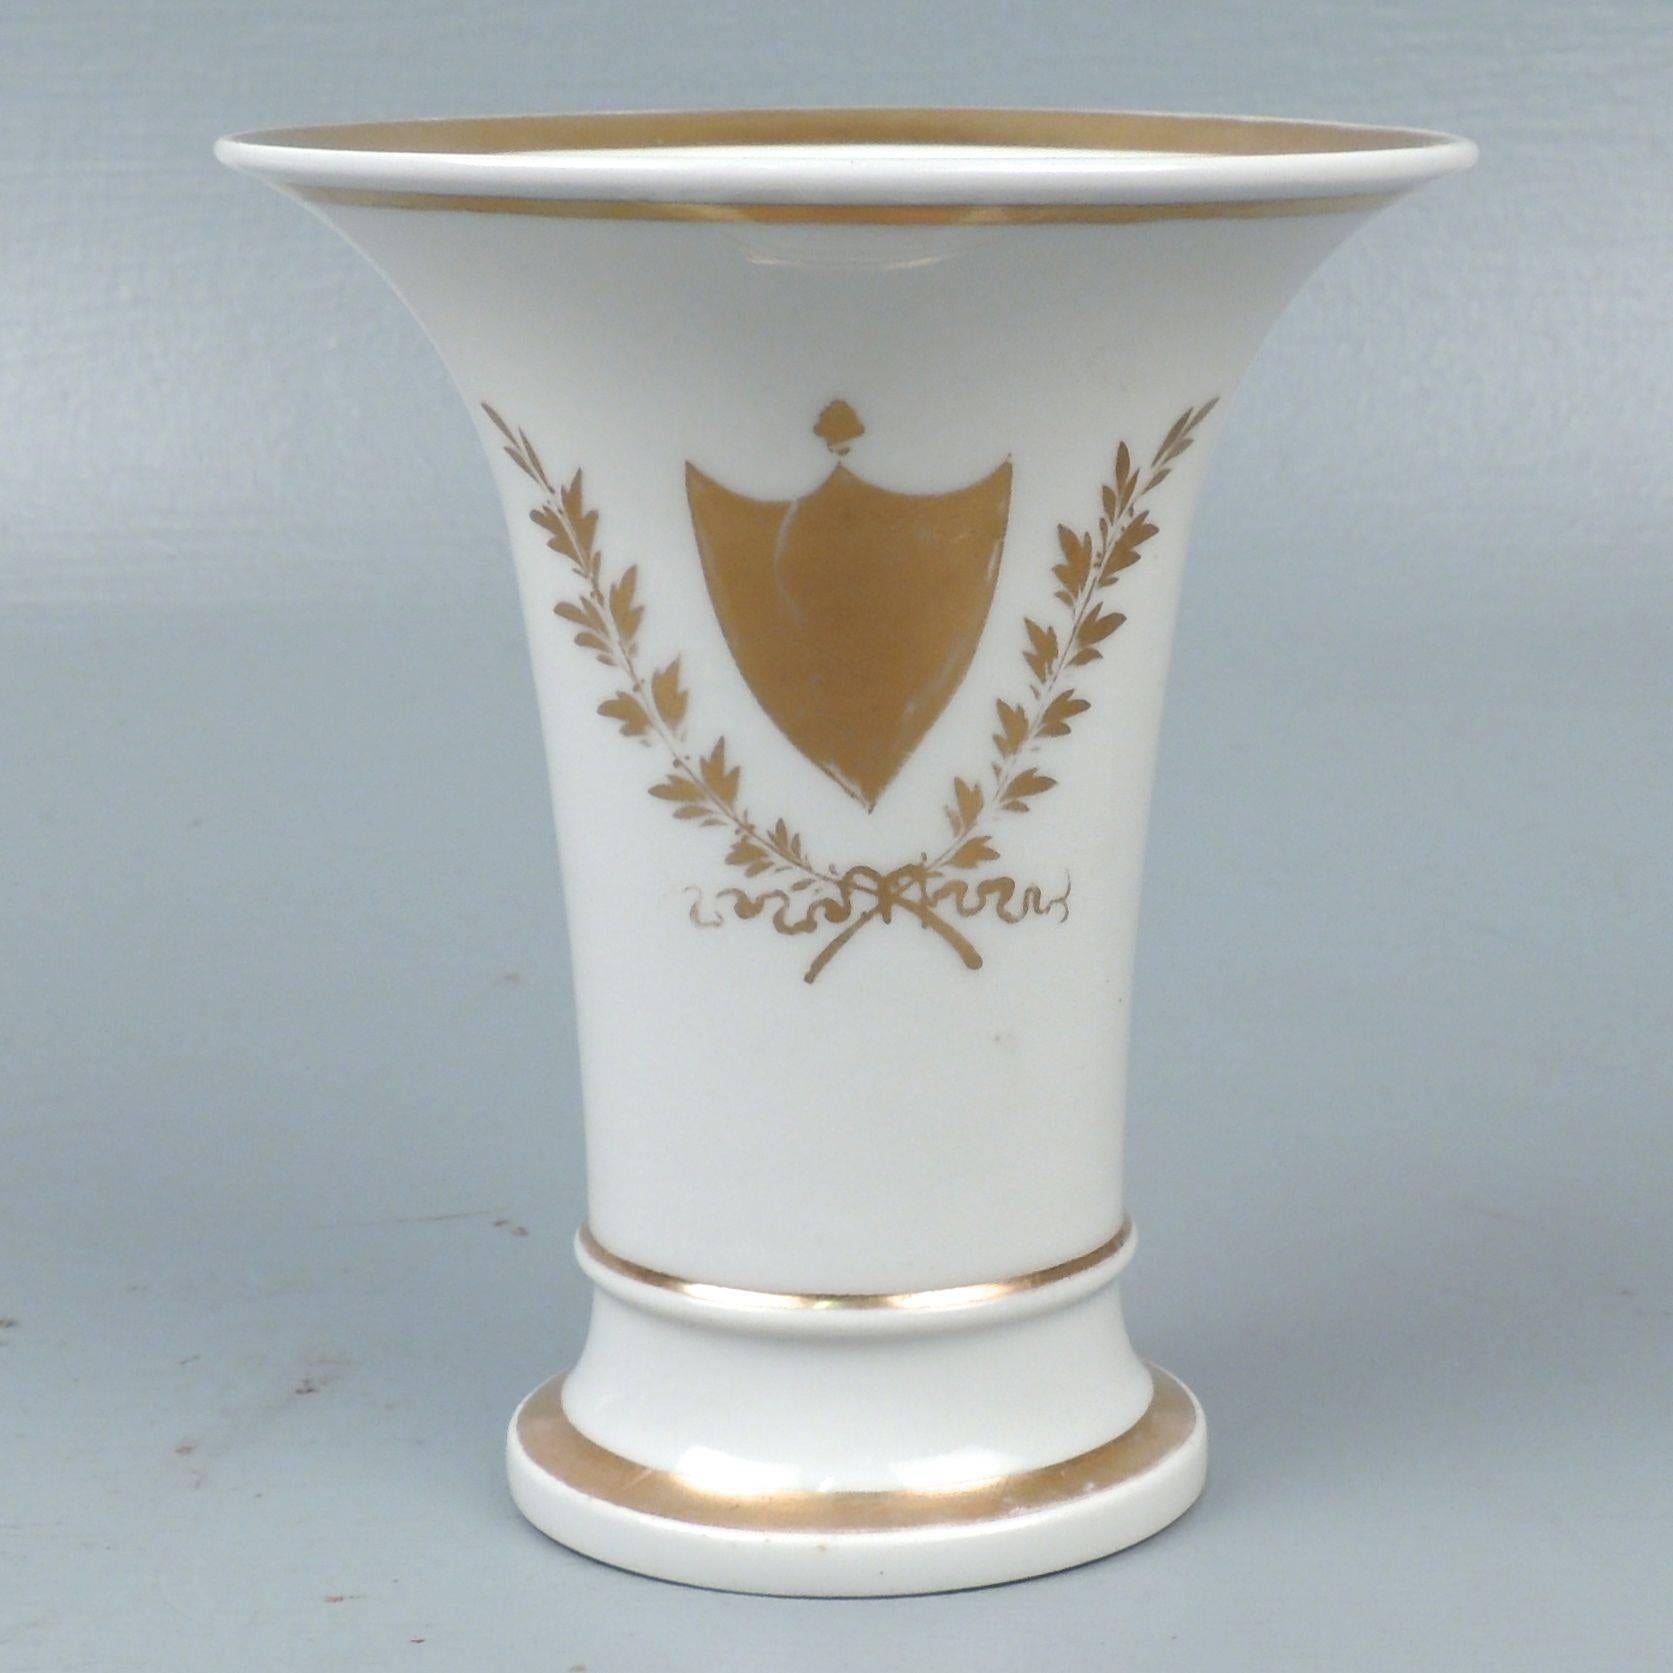 Rare 19th Century Tucker and Hemphill American Porcelain Trumpet Vase, 1830s In Good Condition For Sale In Philadelphia, PA